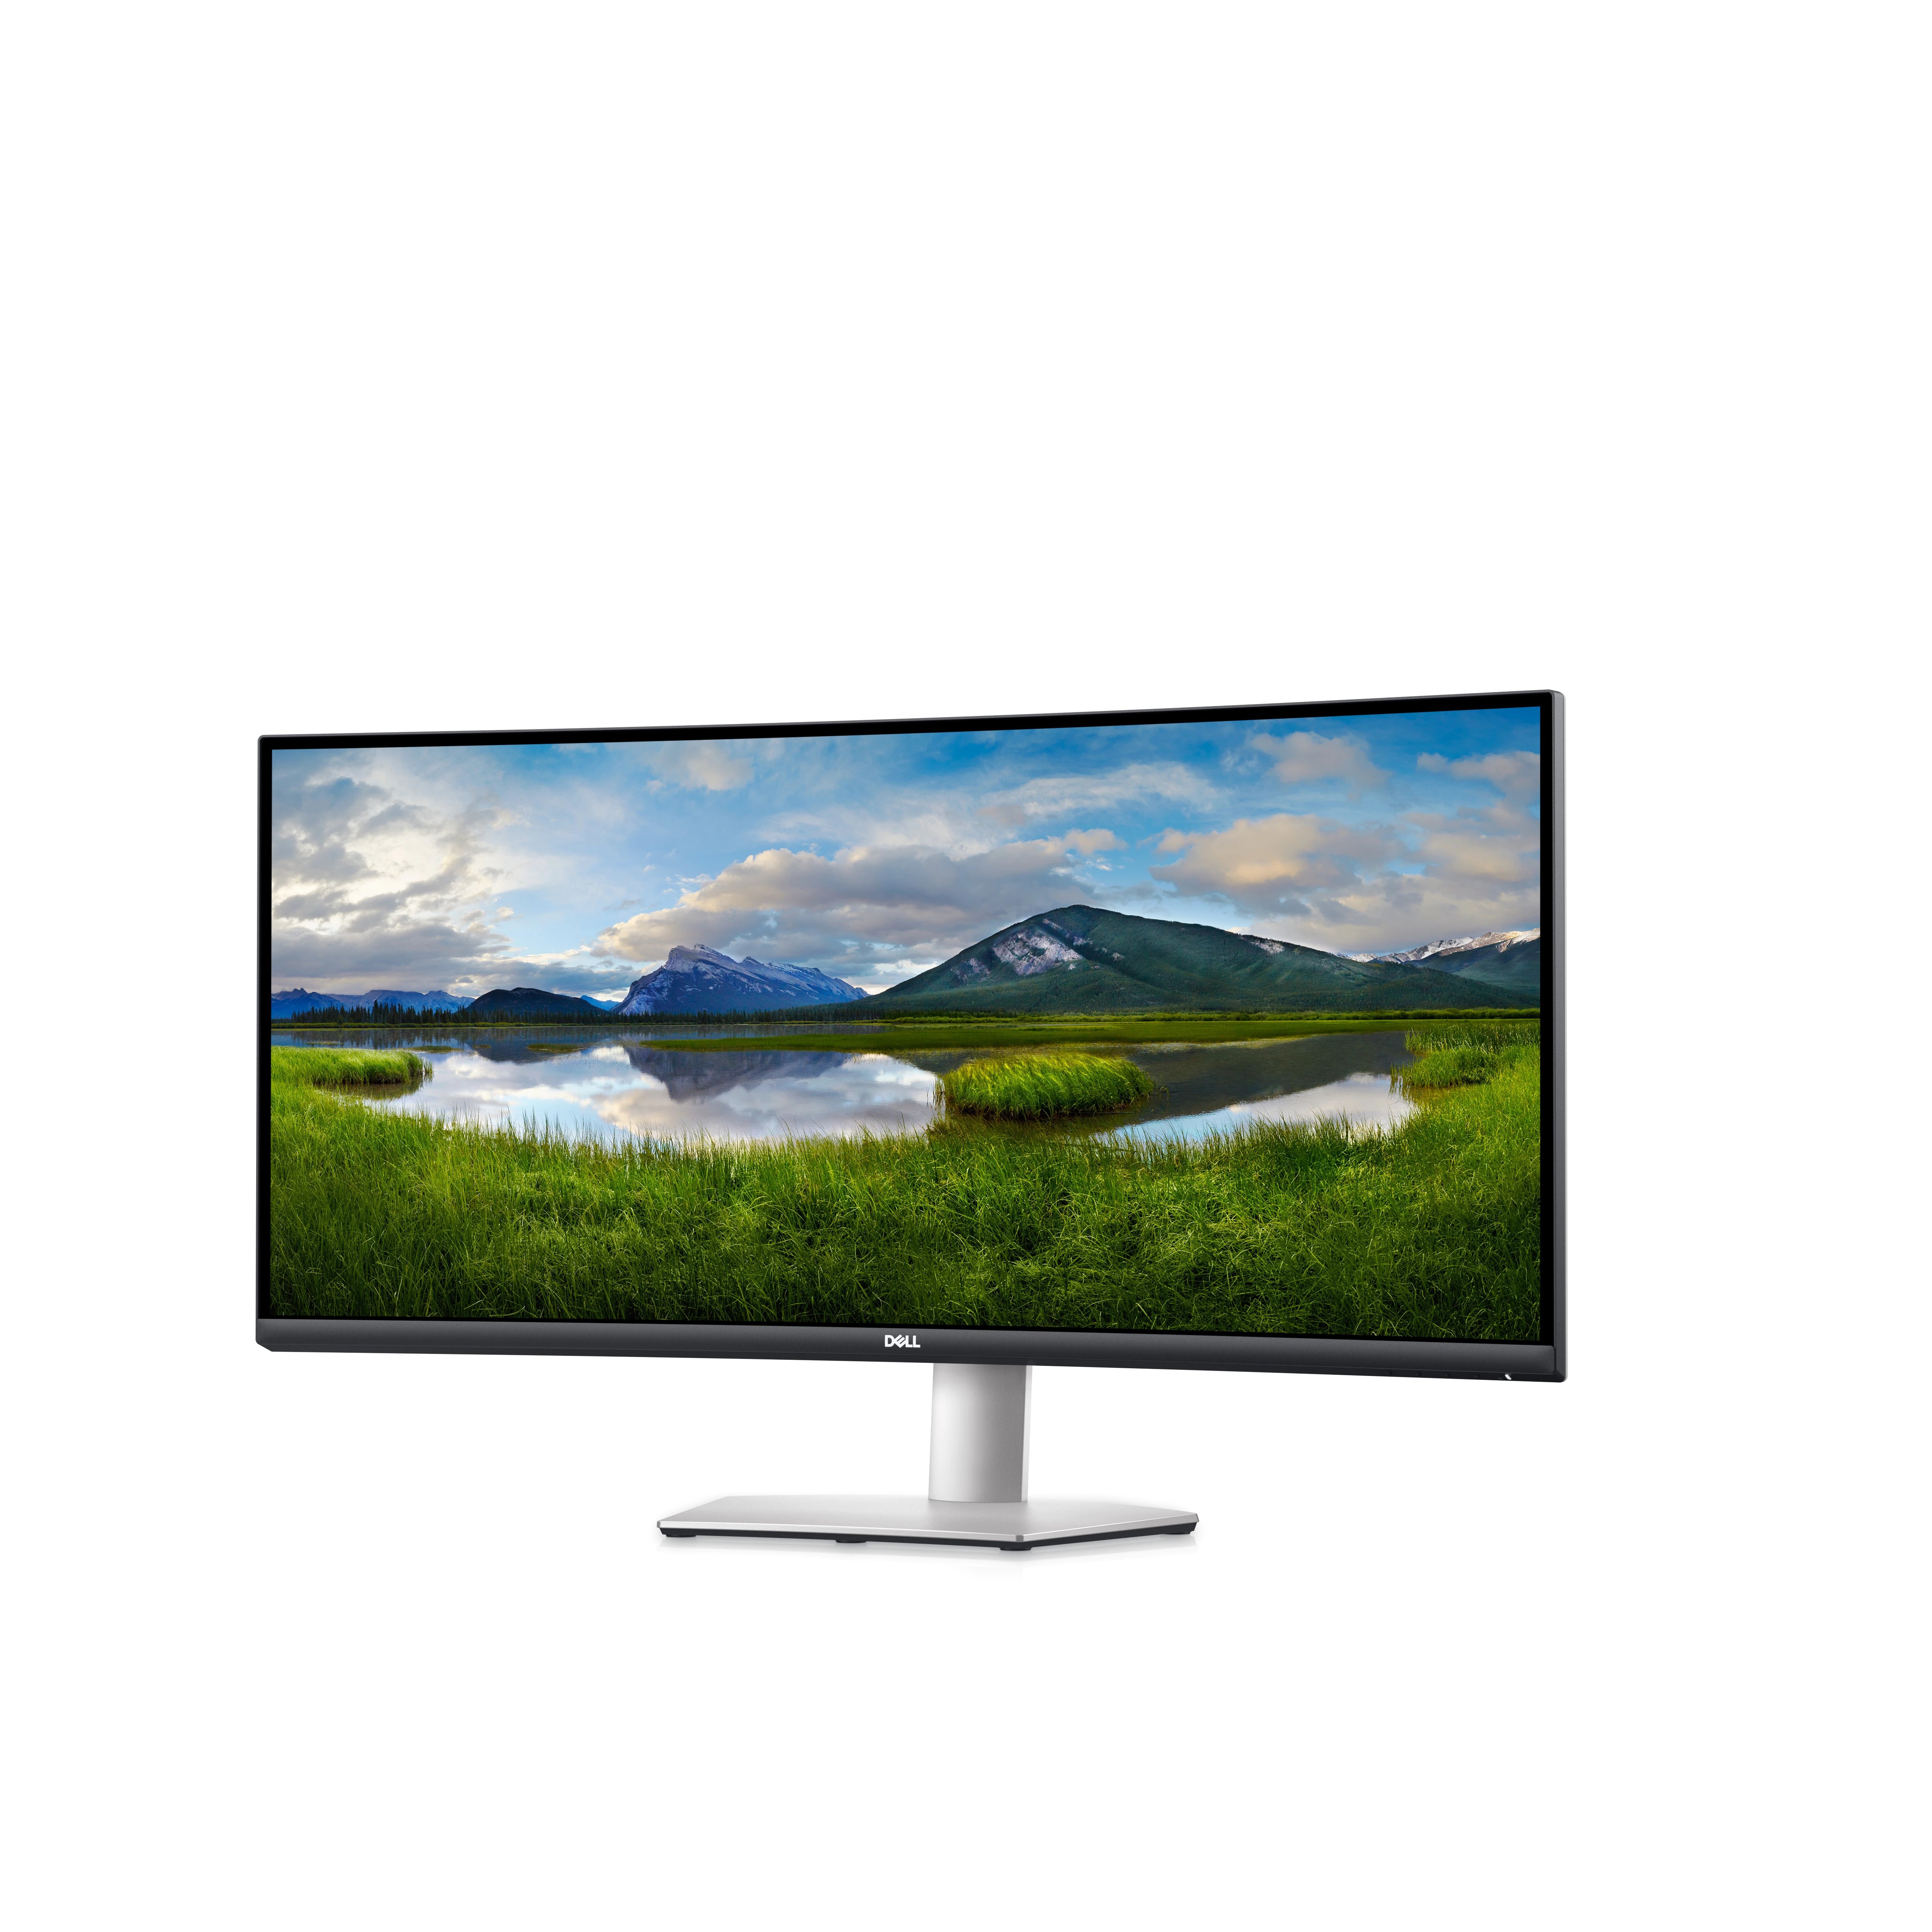 DELL S3422DW 34" 4MS WQHD 3440x1440 100Hz HDMI/DP CURVED IPS LED MONITOR